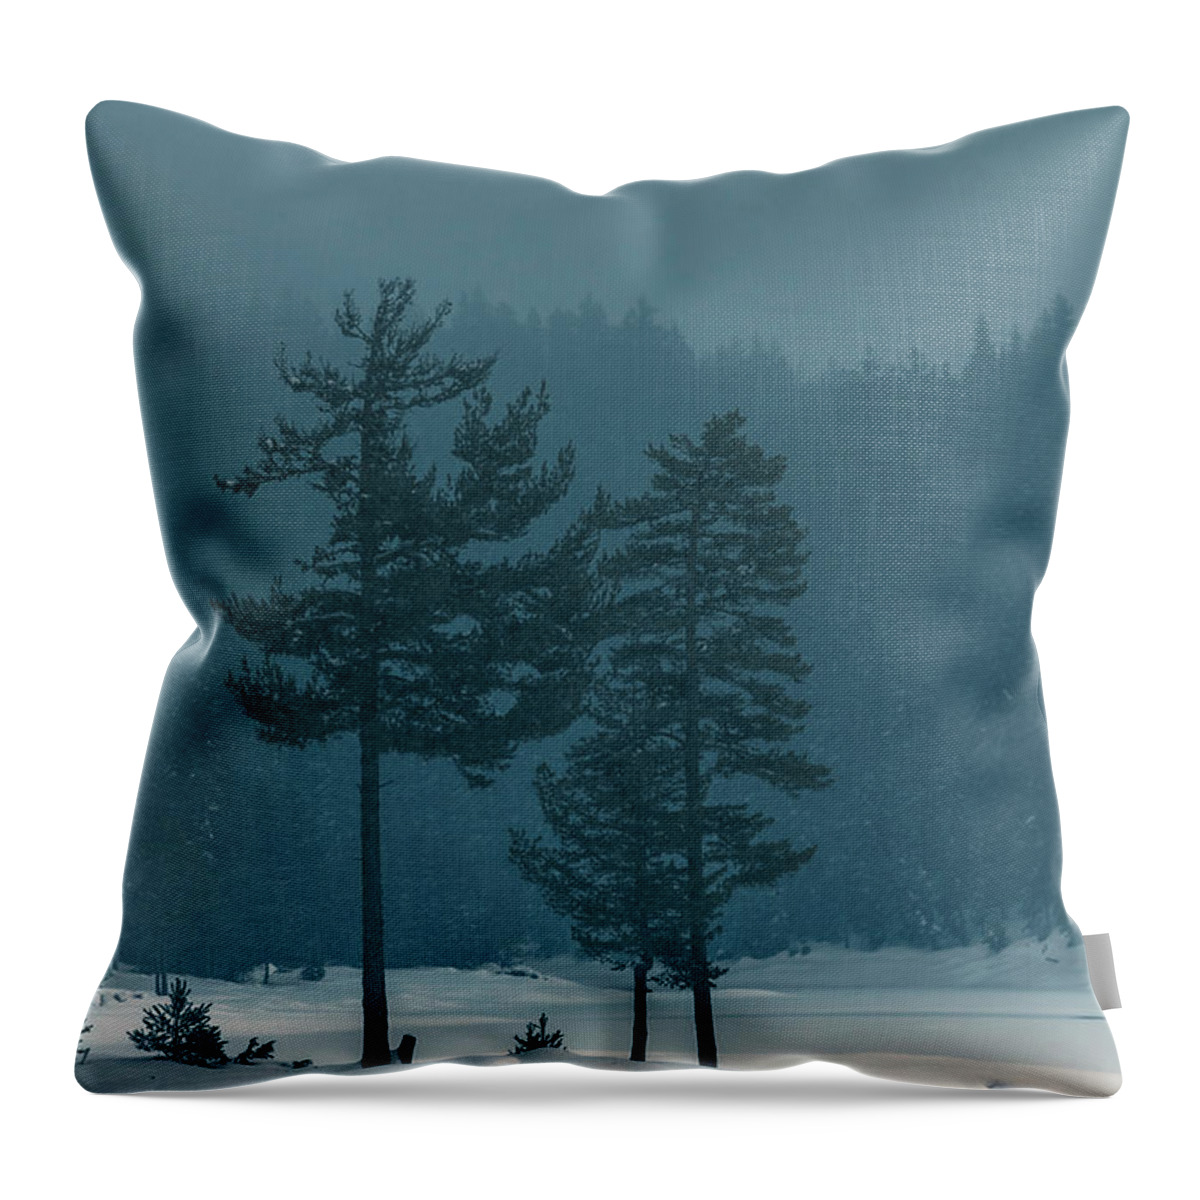 Bulgaria Throw Pillow featuring the photograph Blue Winter Day by Evgeni Dinev